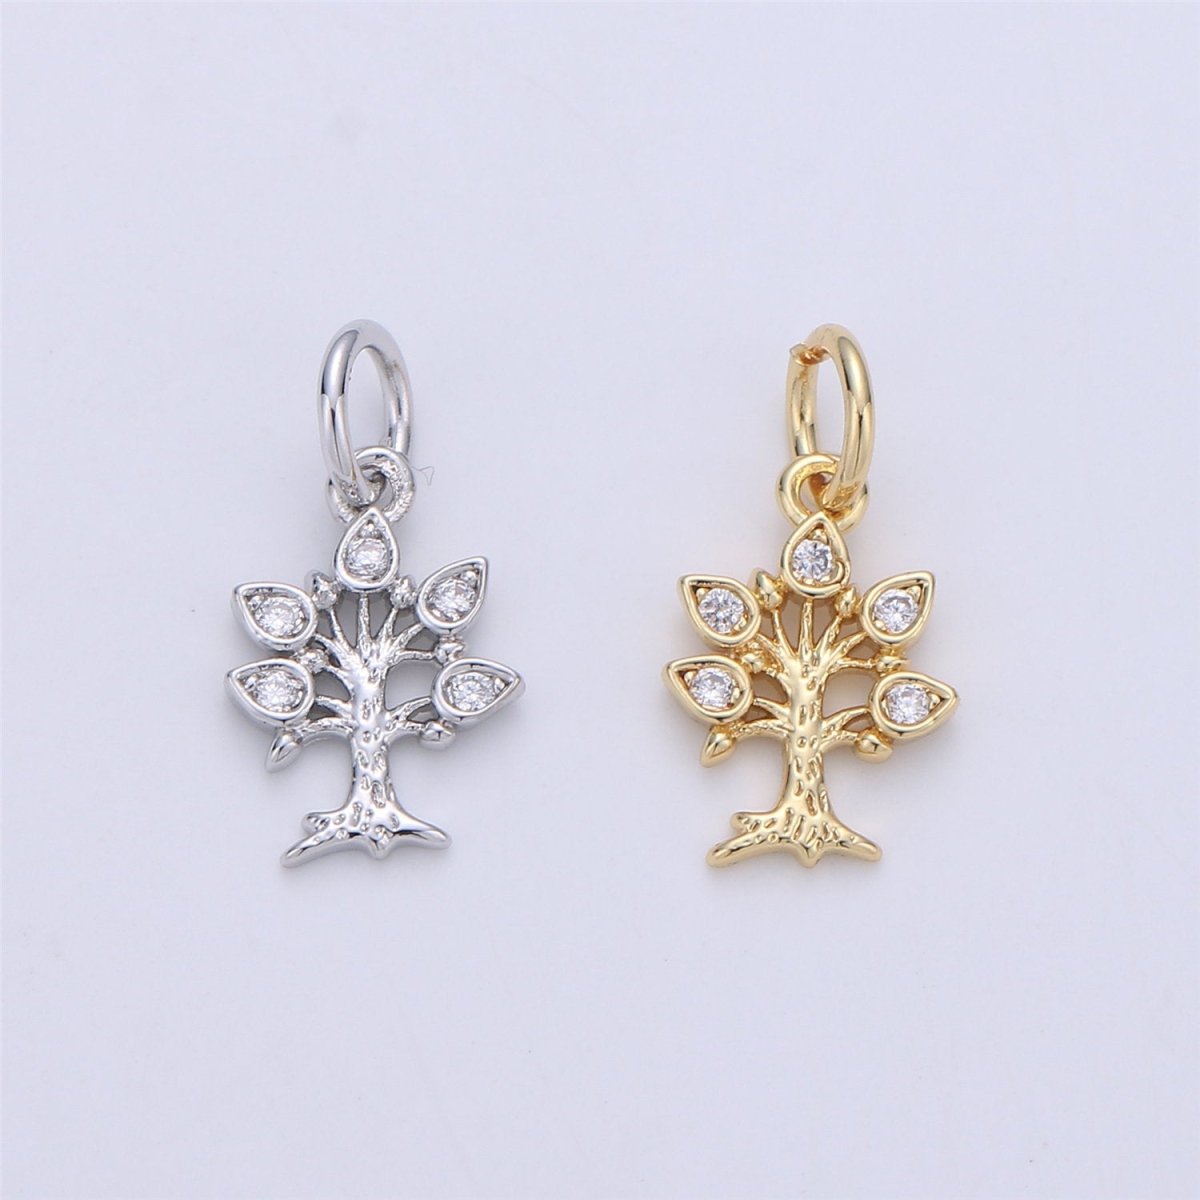 24K Gold filled Rustic Tree of Life Dainty Charm with Micro Pave charm Cubic Zirconia CZ Stone for Necklace or Bracelet, C-917 - DLUXCA